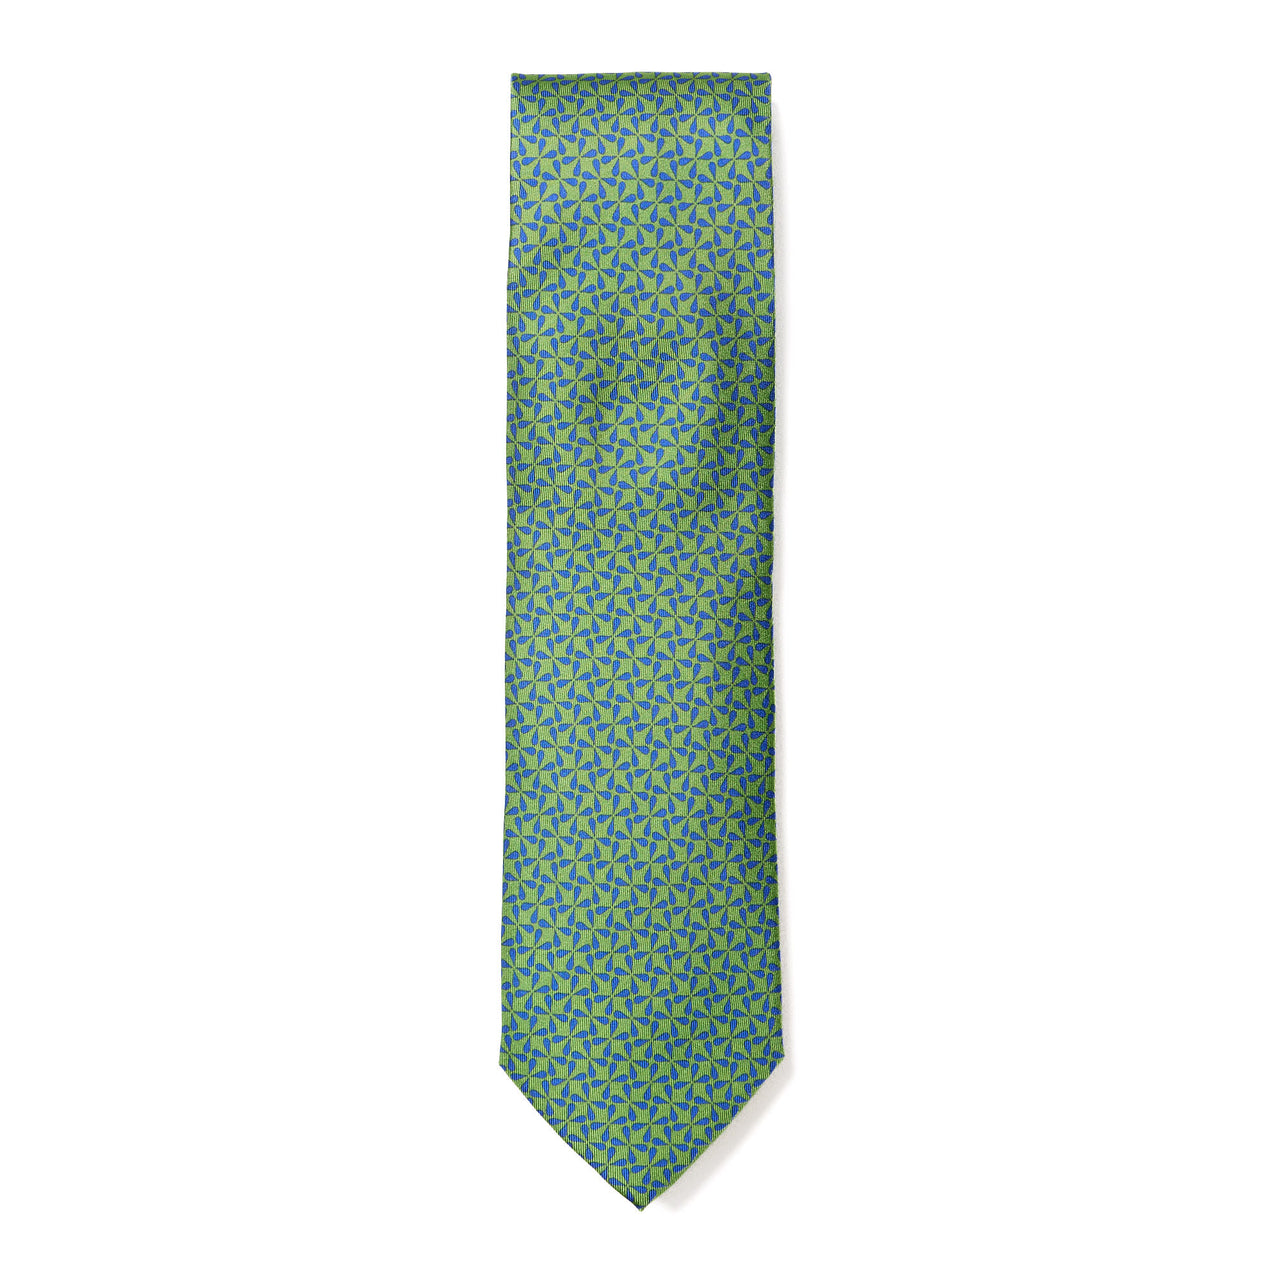 HENRY SARTORIAL X CANTINI Printed Silk Tie GREEN/BLUE